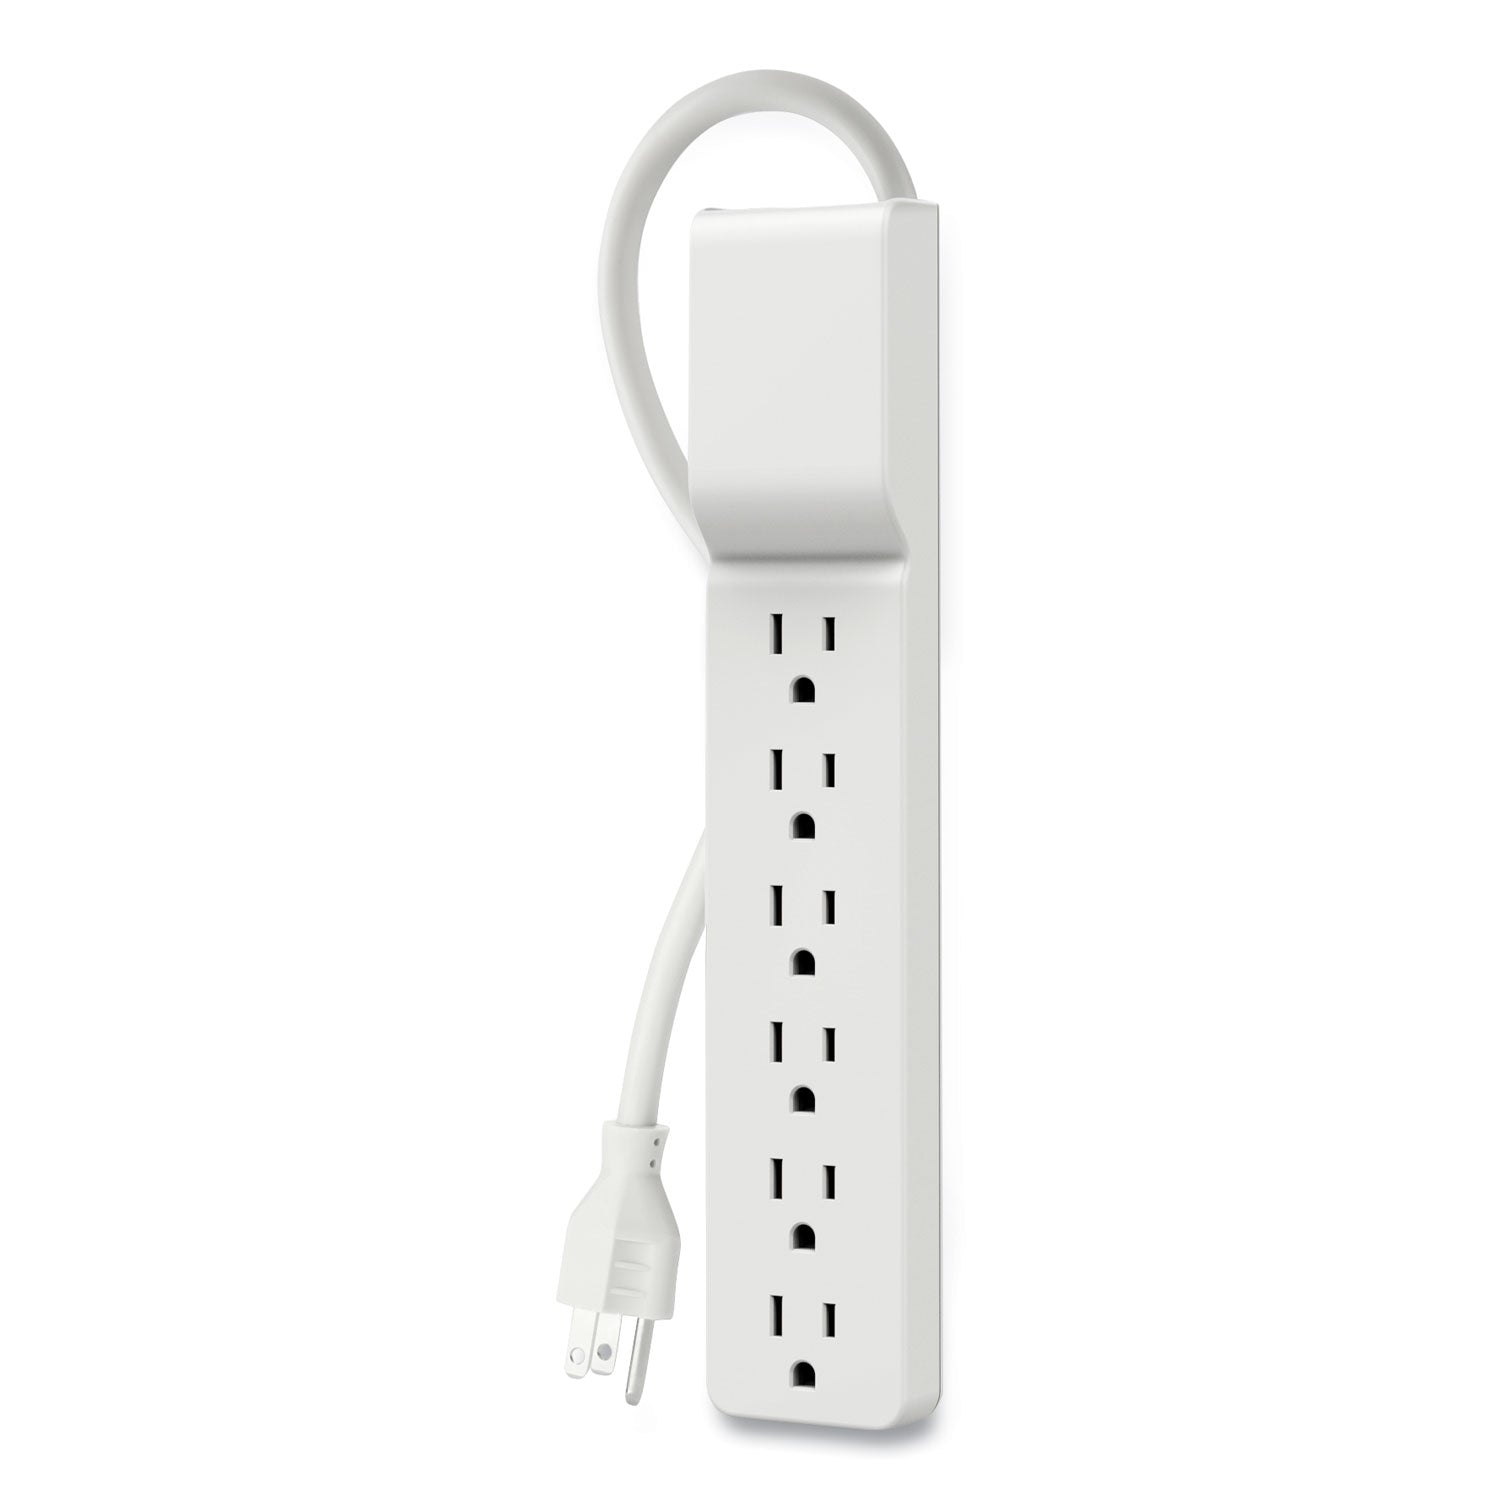 home-office-surge-protector-6-ac-outlets-6-ft-cord-720-j-white_blkbe10600006cm - 3